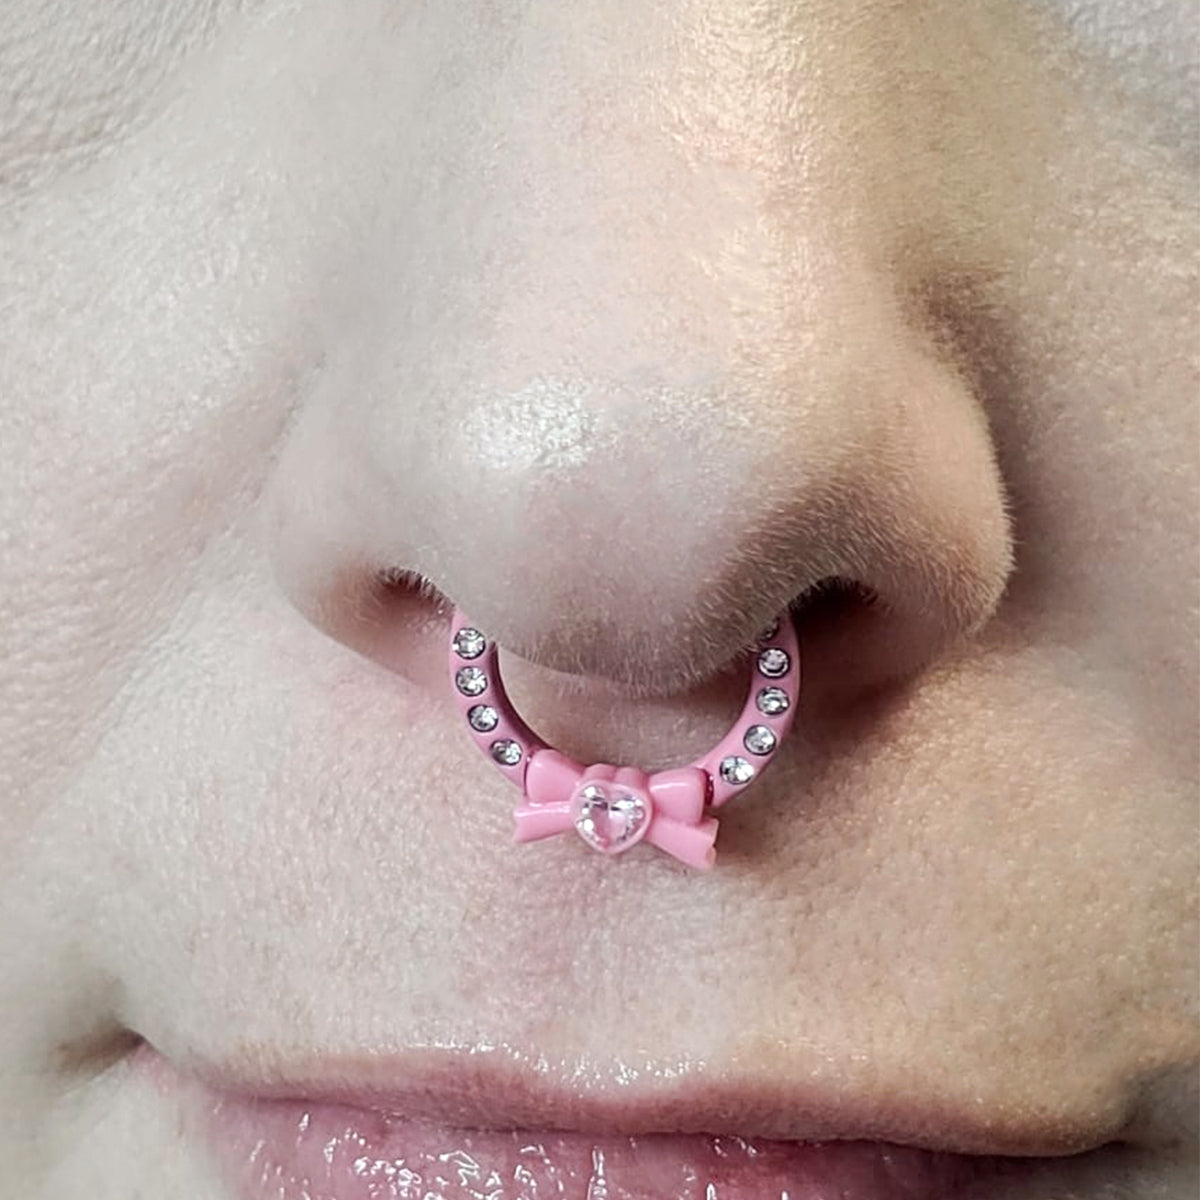 Septum Hinged Clicker Ion Plated Pink Bow with CZ Jewels Surgical Steel 16 Gauge